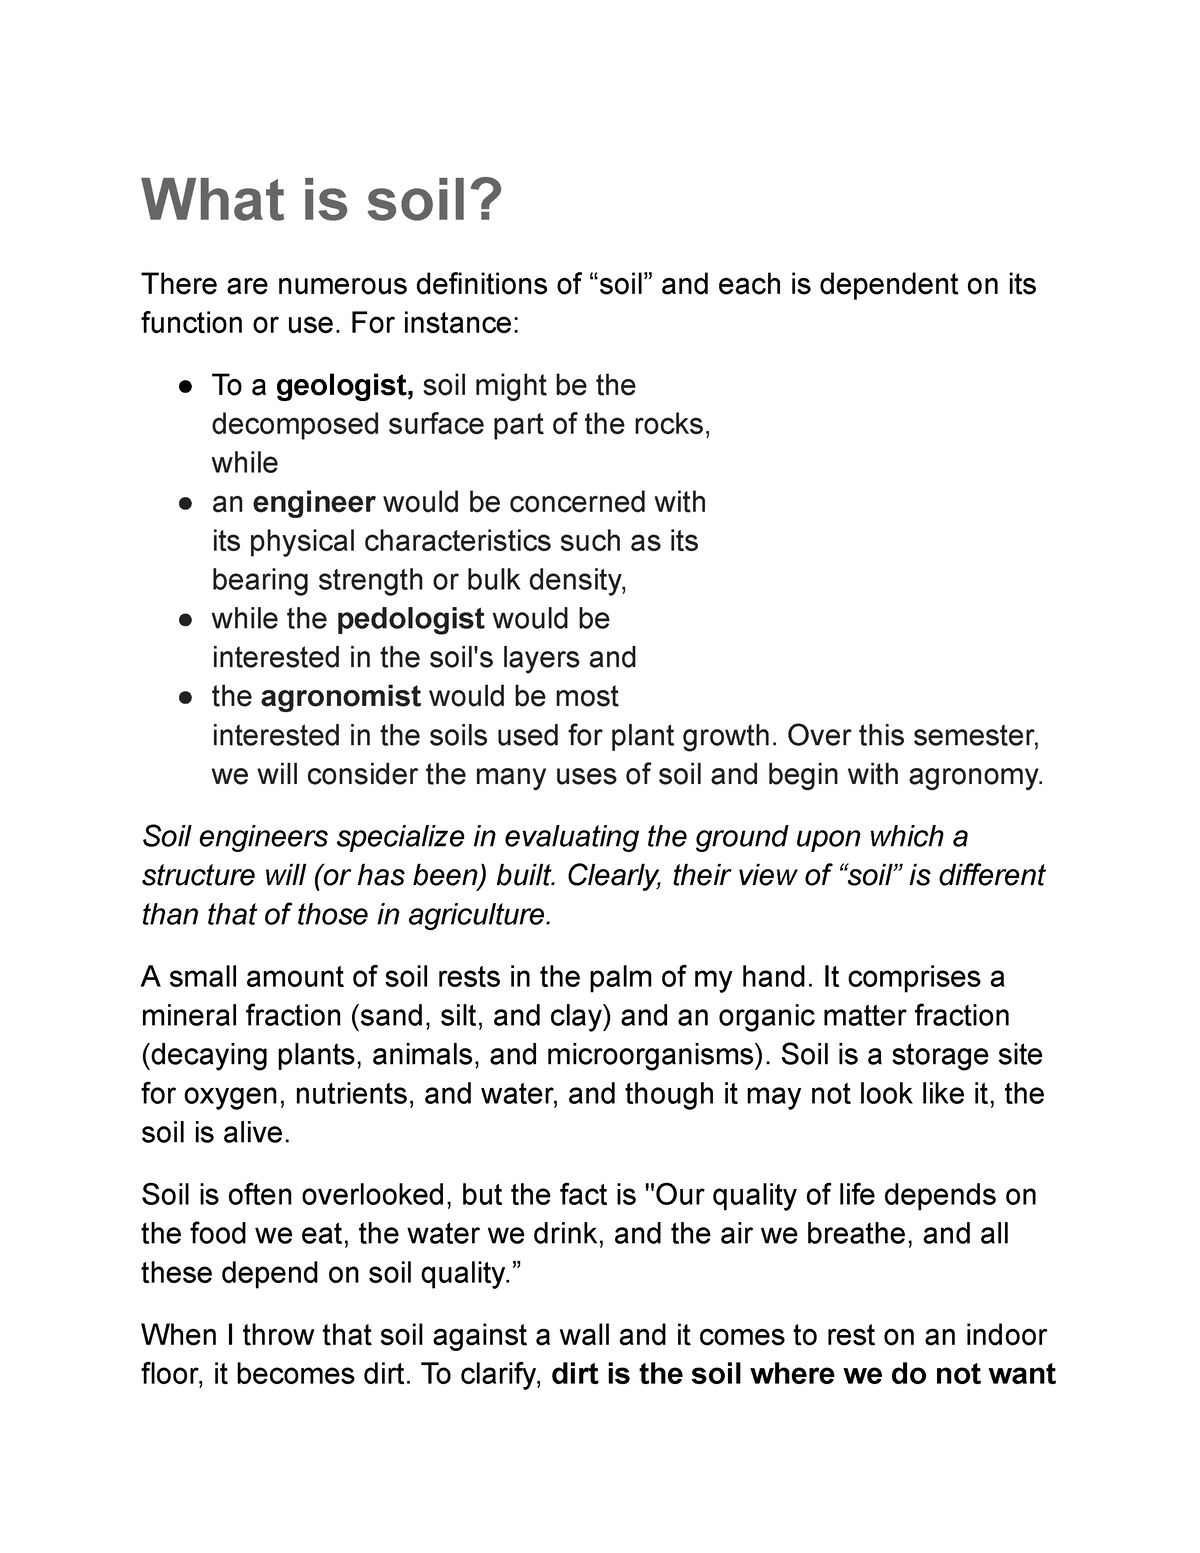 world-of-soils-study-1-what-is-soil-there-are-numerous-definitions